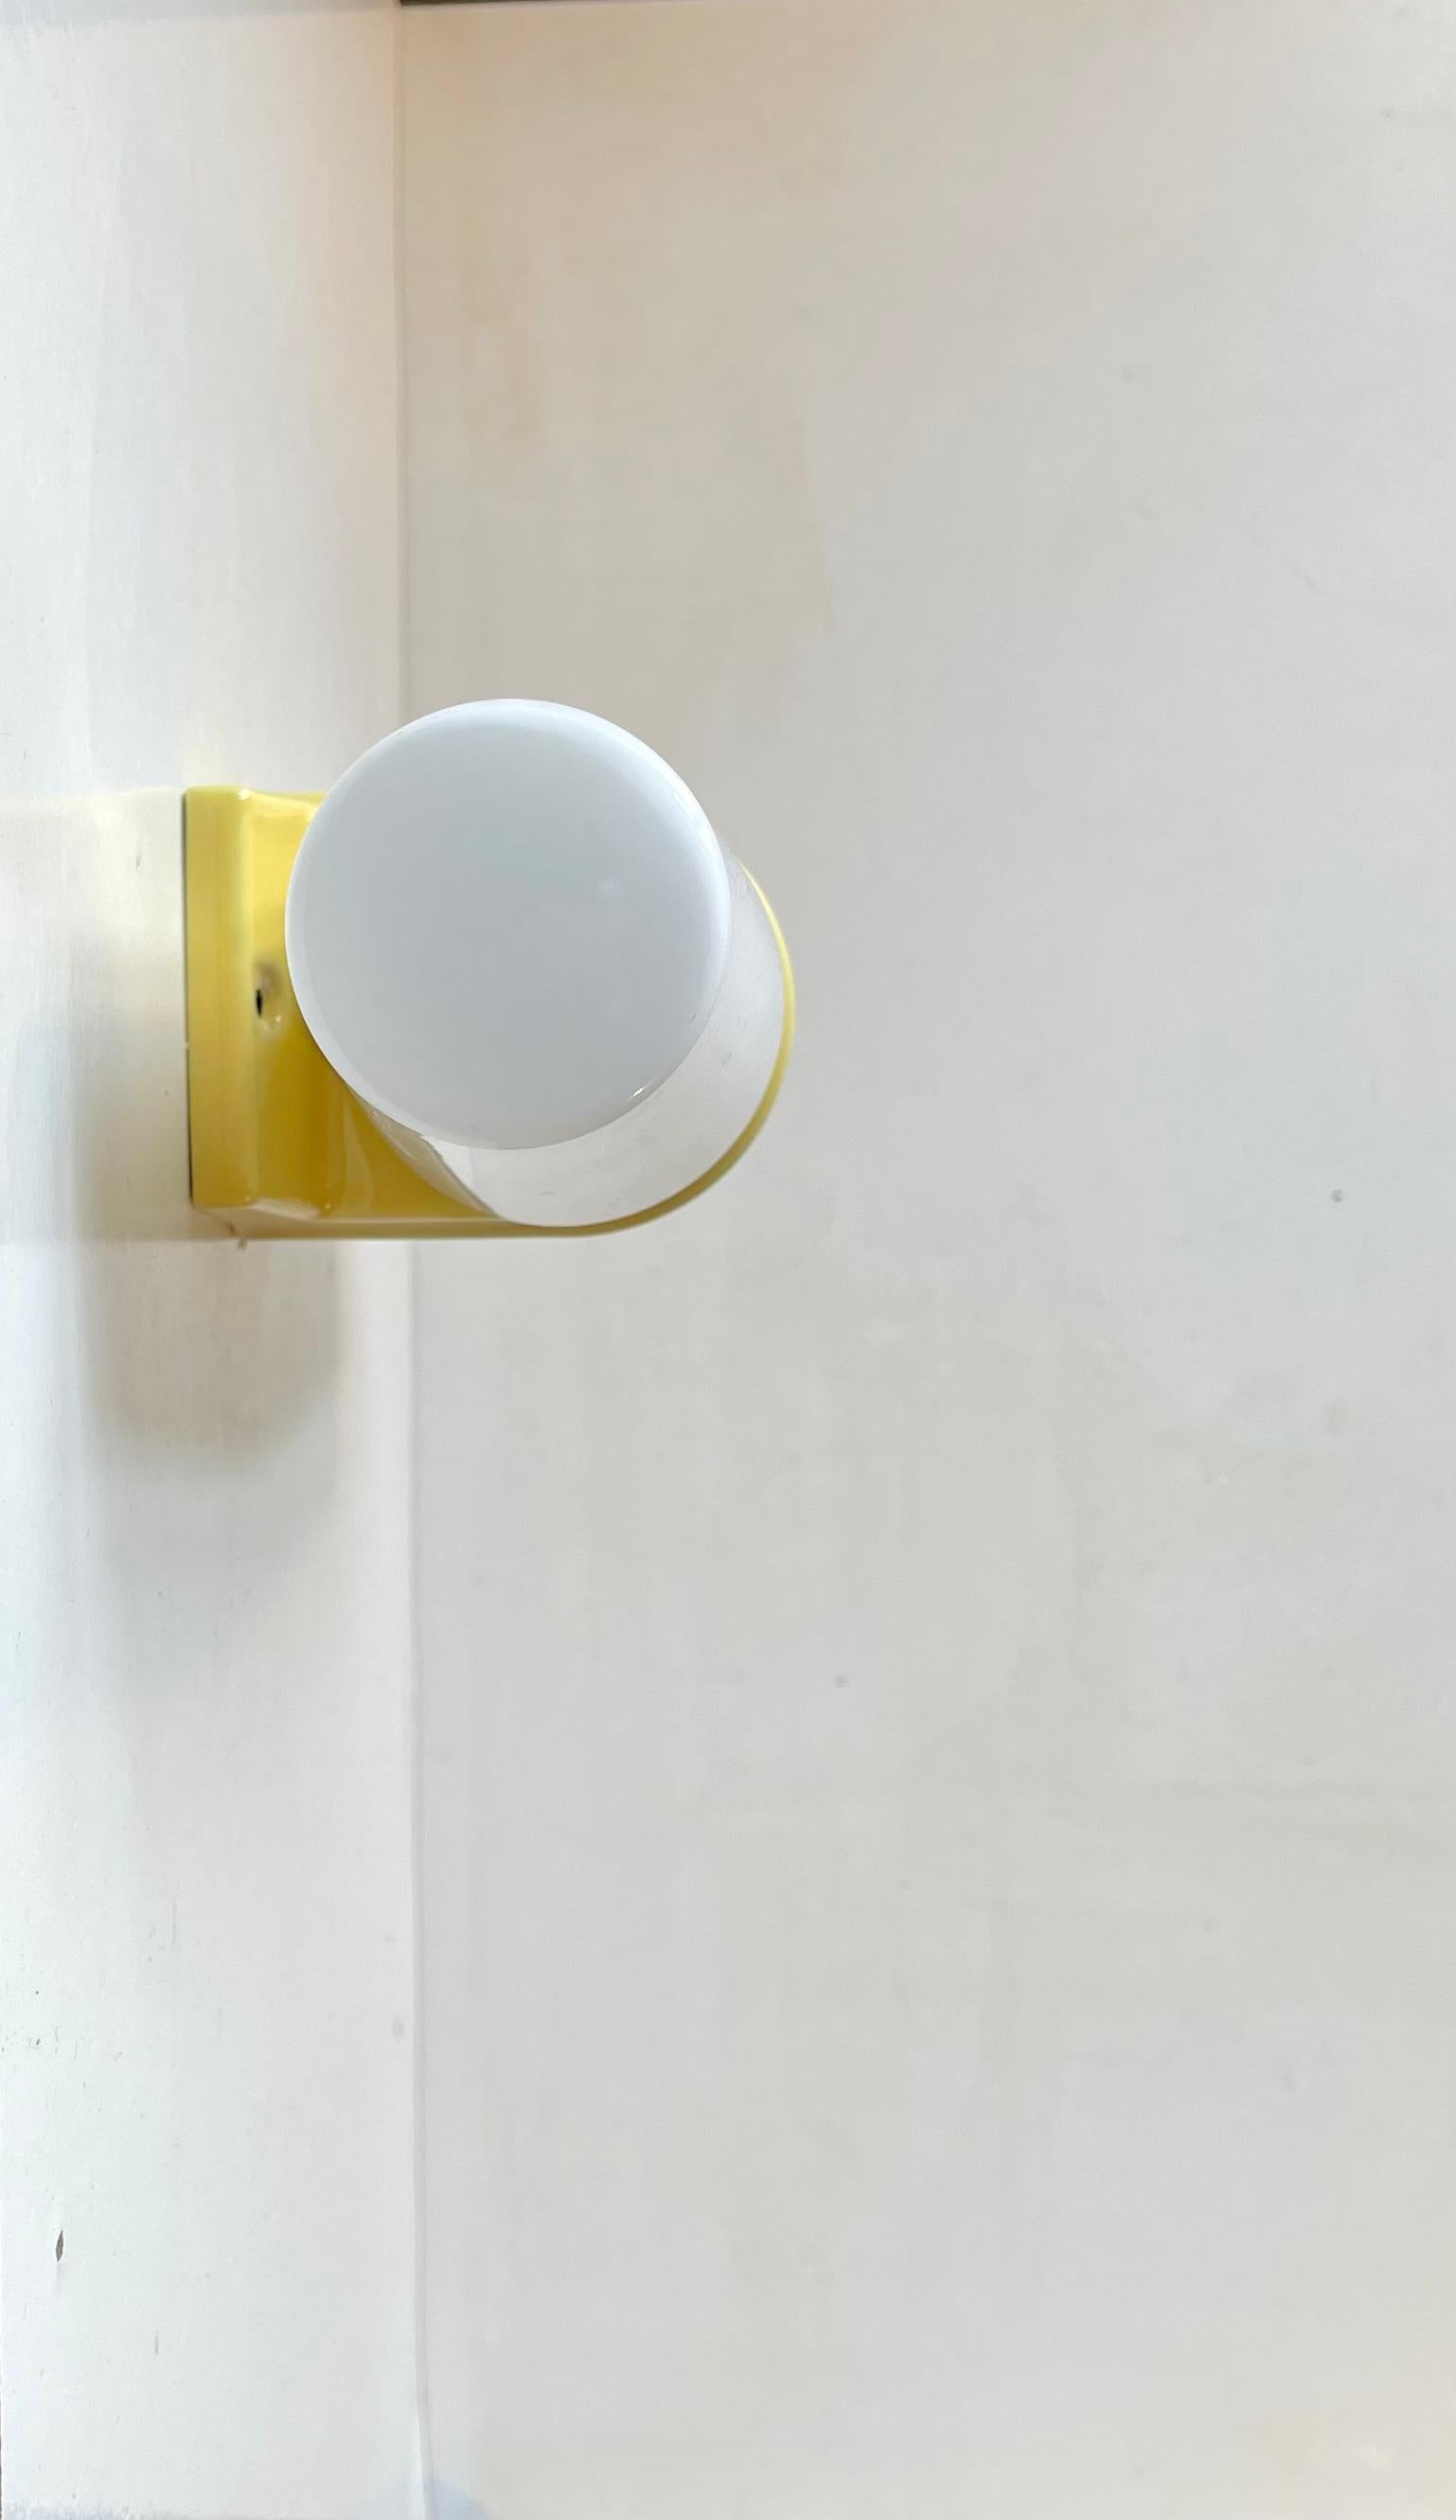 Large dual Wall sconce suitable as bathroom or outdoor lighting. Designed by Prince Sigvard Bernadotte for the swedish company Ifö during the 1960s. Yellow glazed porcelain mount with 2 white opaline glass shades. 2 way mount - vertical or